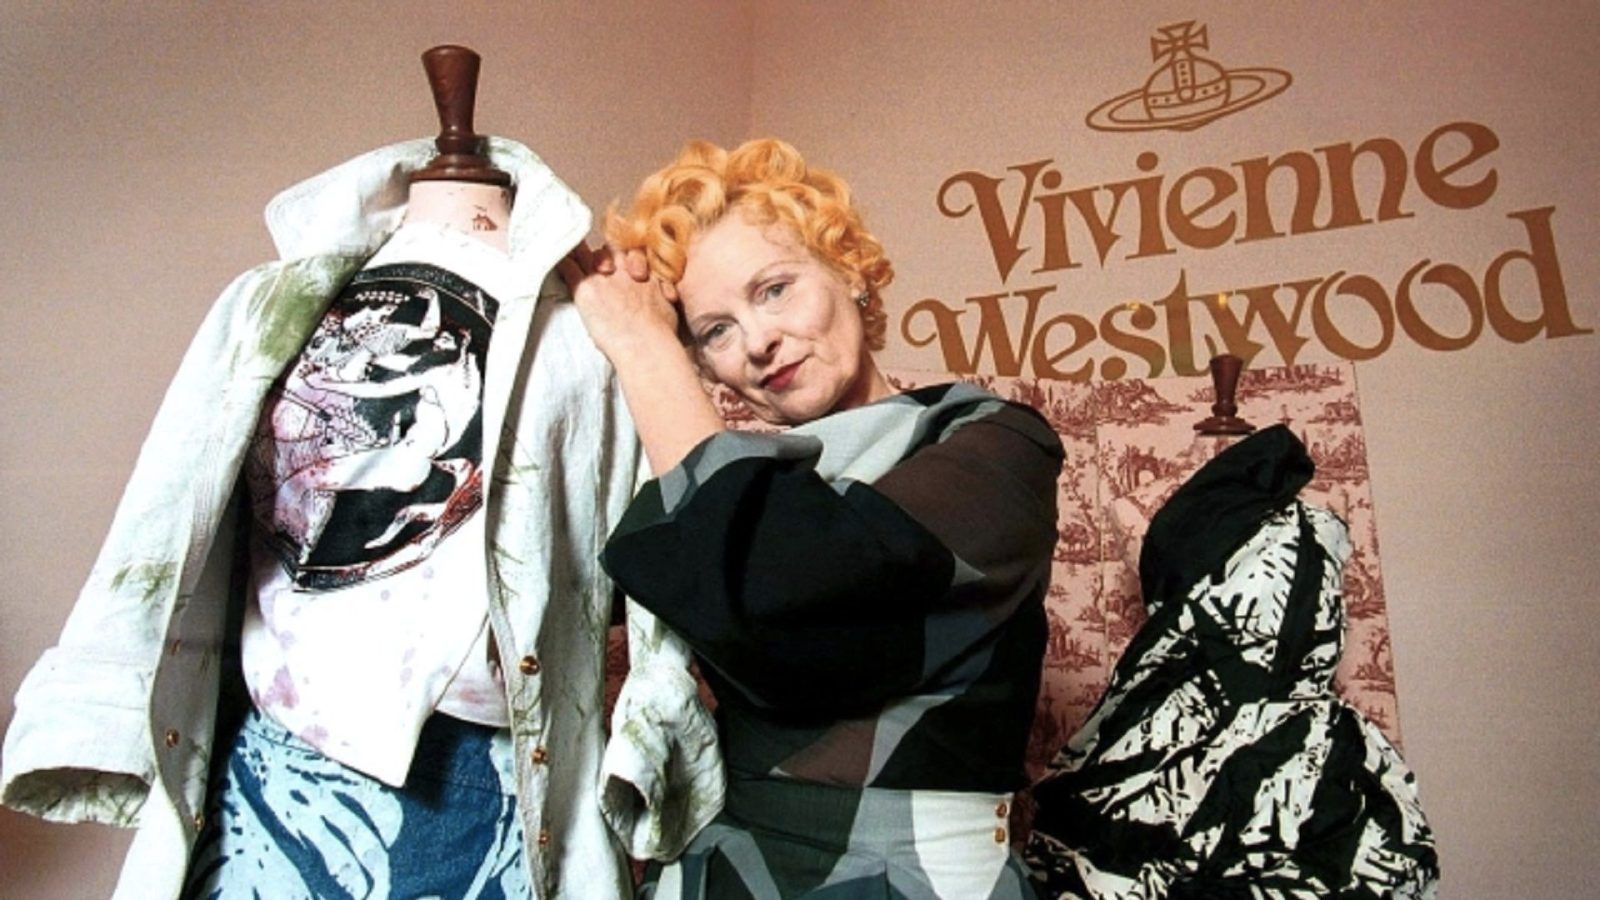 Robinsons Bookshop Canberra - ✨ Vivienne Westwood Catwalk ✨ • Vivienne  Westwood has been reinventing, challenging and changing the fashion world  for over five decades. Celebrating 40 years of catwalk collections, this